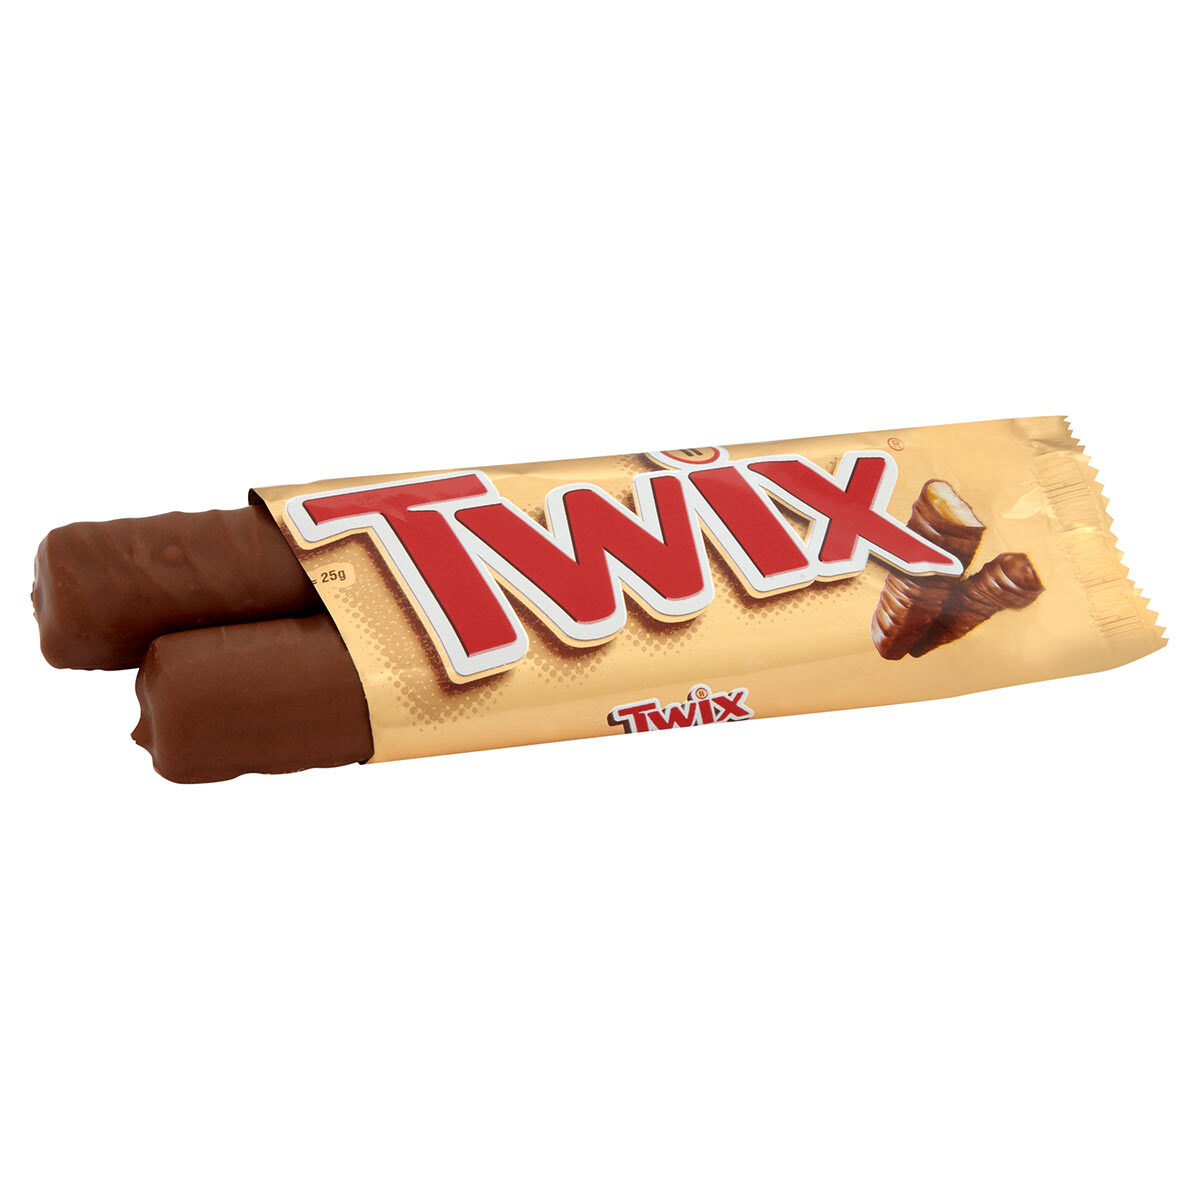 Open Twix Bar with Two Fingers